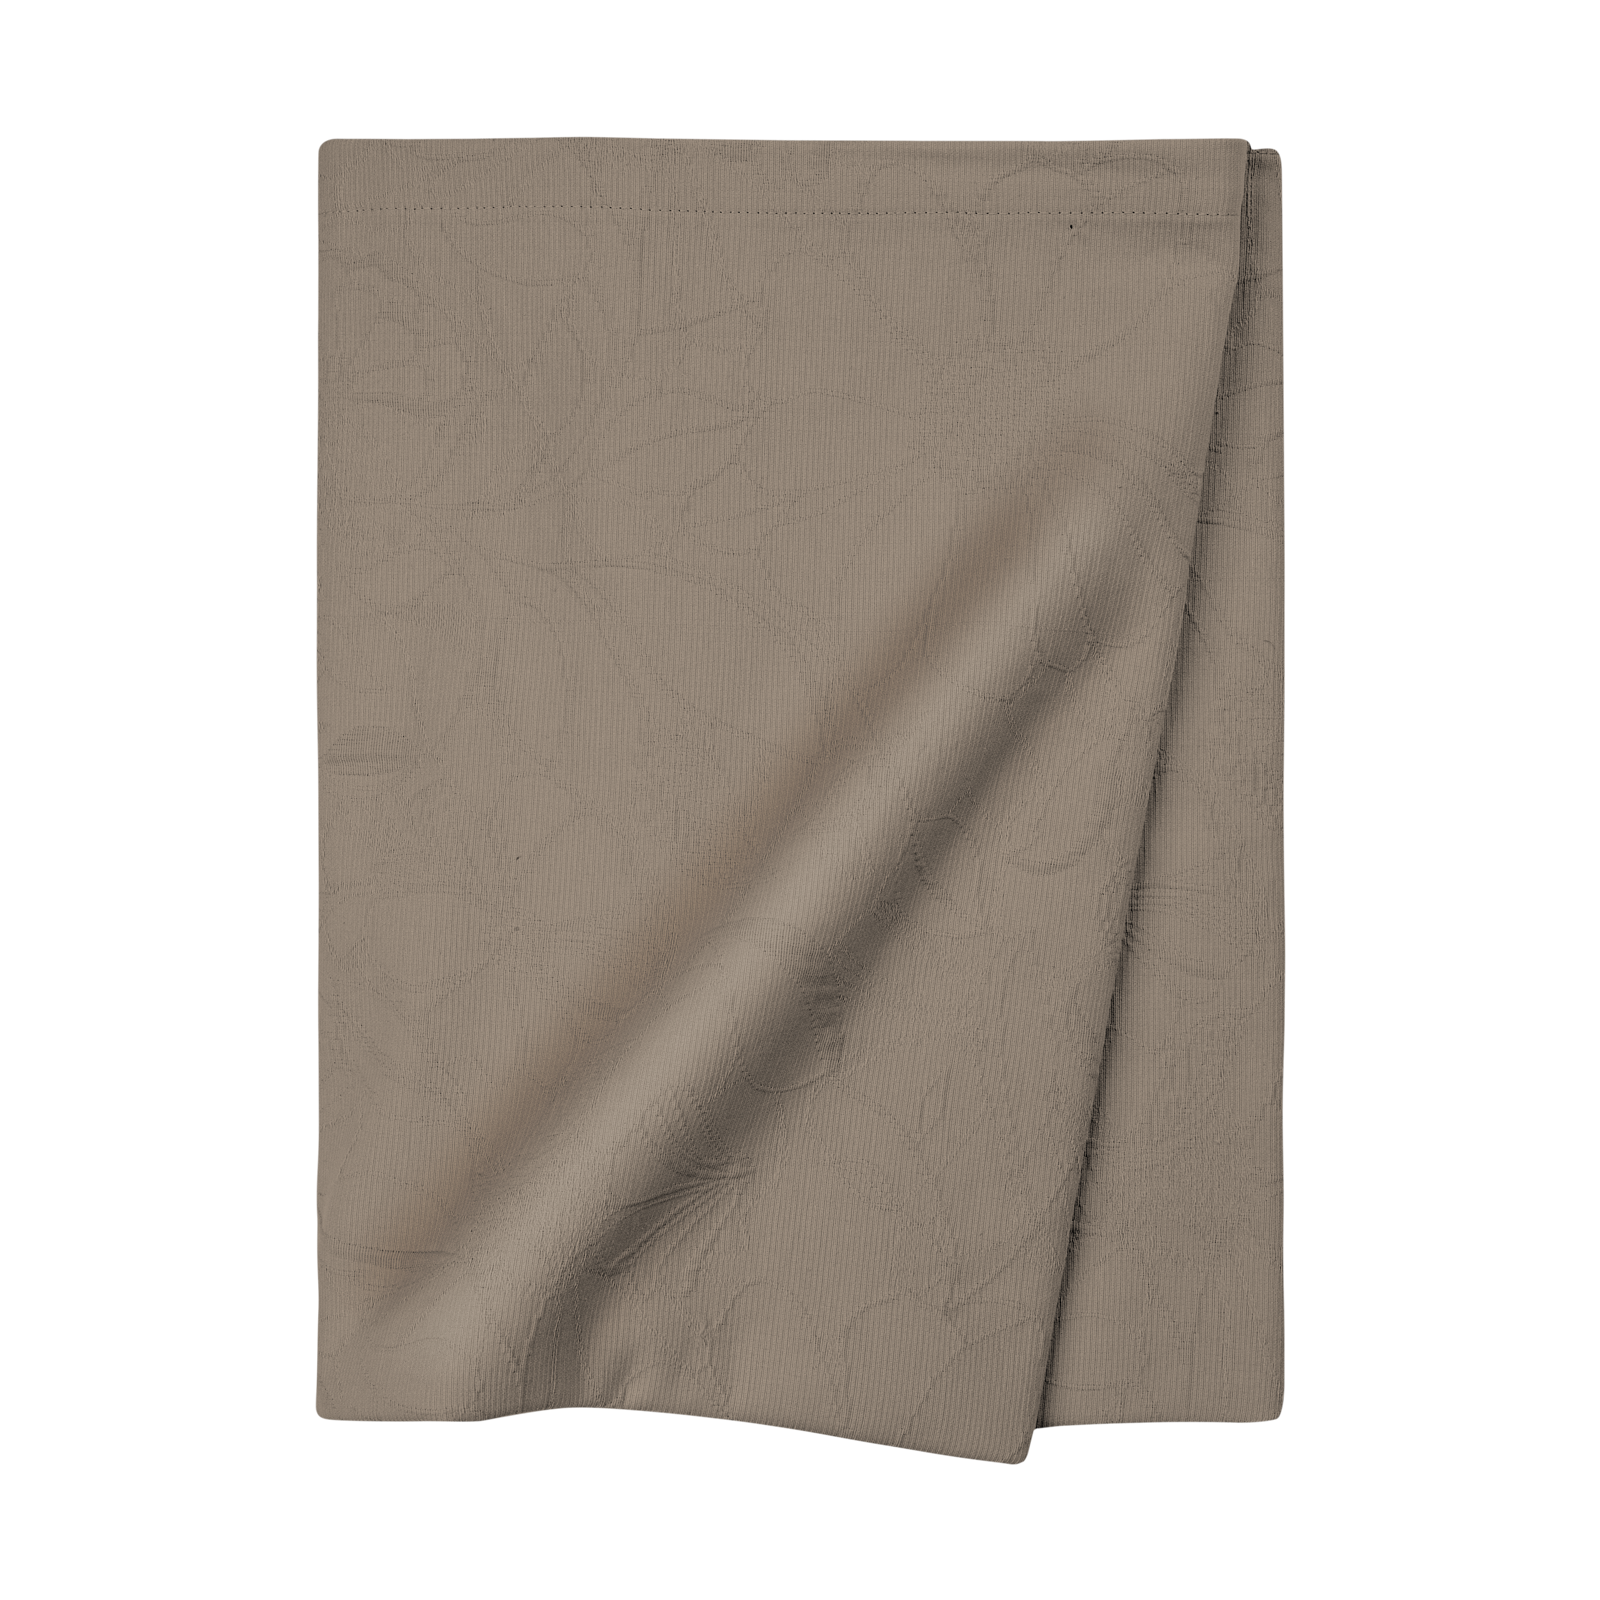 Größe: 135x 170 cm Farbe: taupe #farbe_taupe